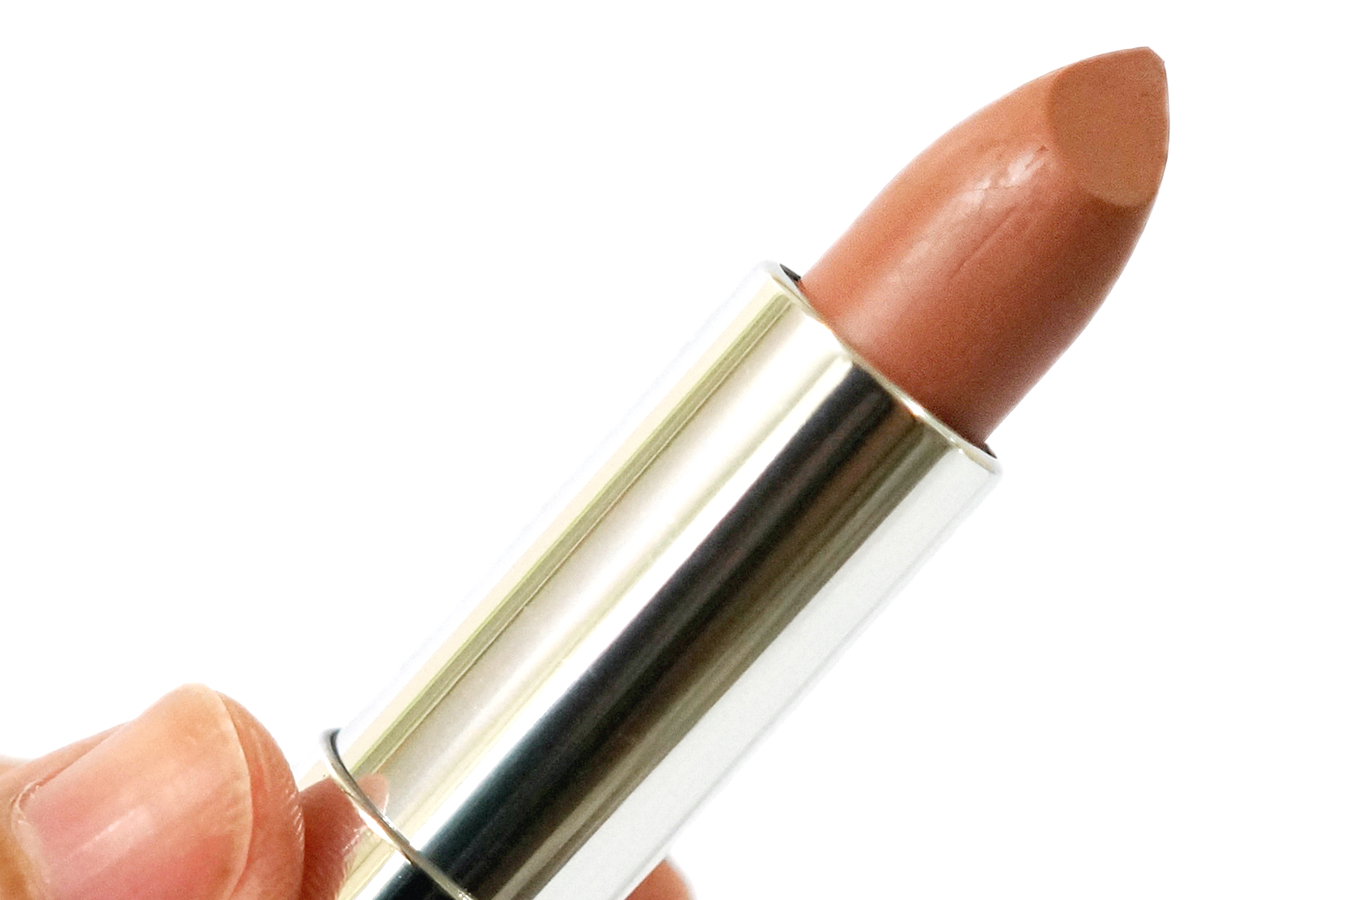 Maybelline Nude Lipstick Toasted Brown Review - Next Level 